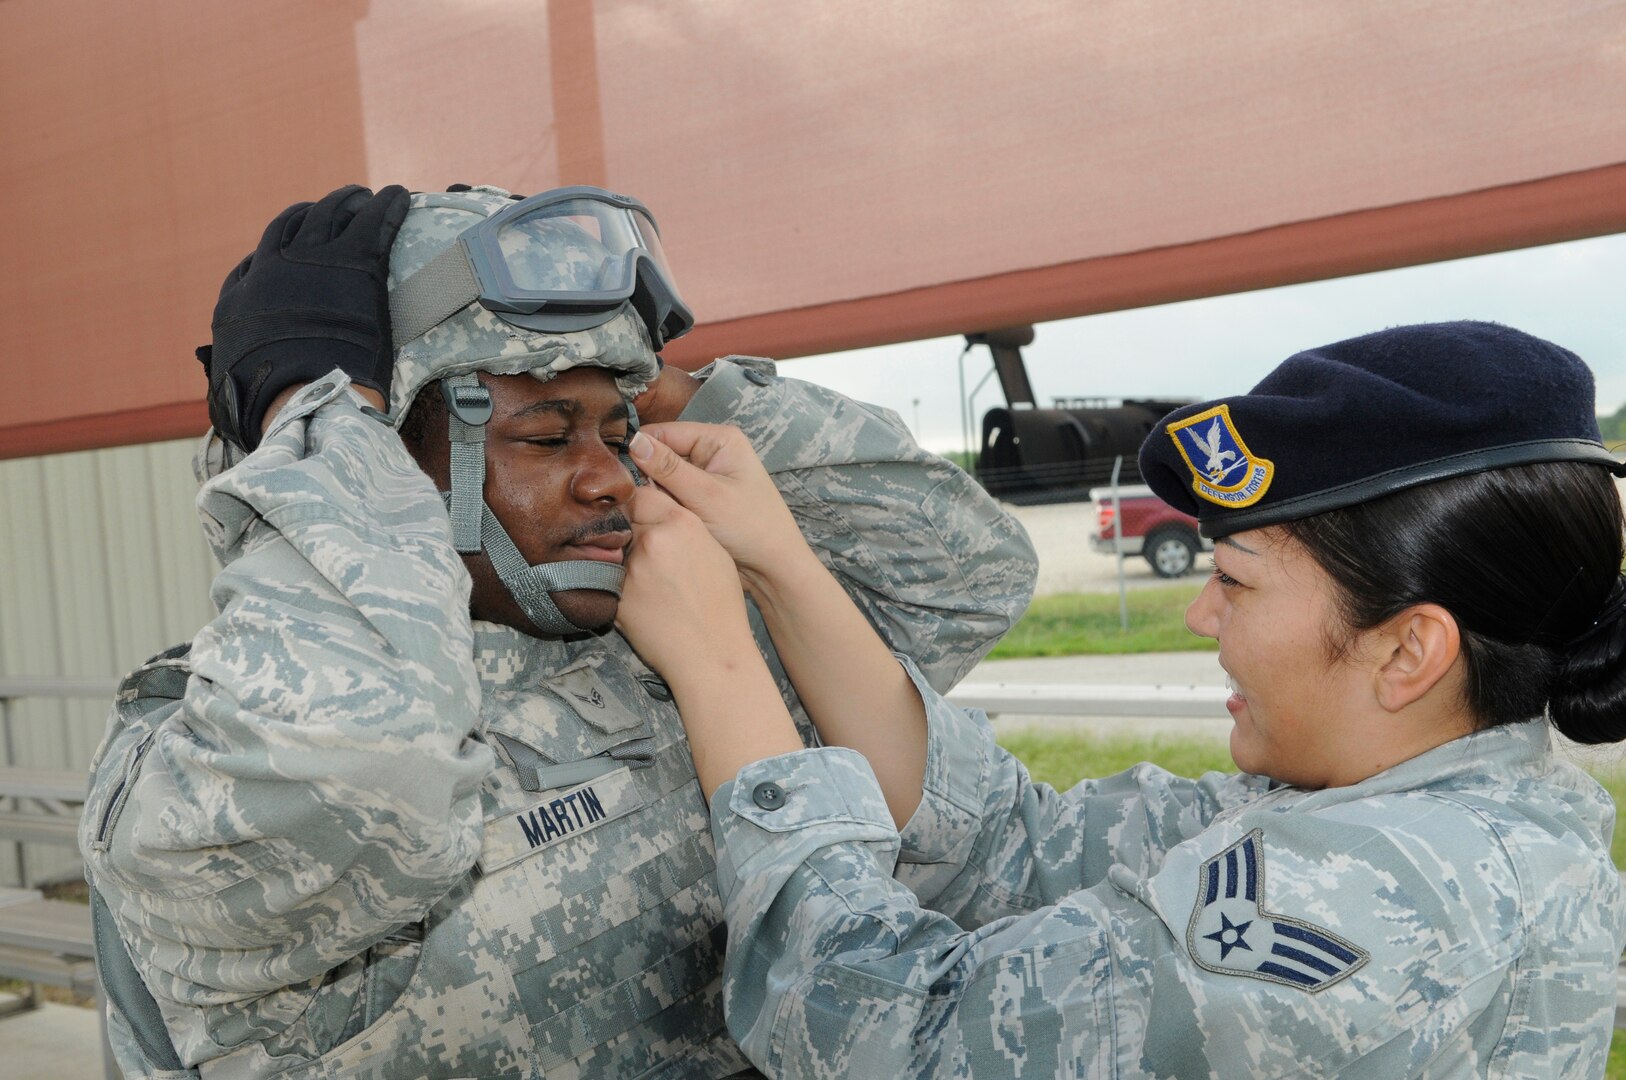 Senior Airman Celina Reyes, 902nd Security Forces Squadron police services administrator, helps Airman 1st Class Carl Martin installation police officer adjust his helmet chin strap prior to beginning Shoot, Move and Communicate training at Camp Talon on Joint Base San Antonio- Randolph, June 7.  (U.S. Air Force Photo by Don Lindsey)